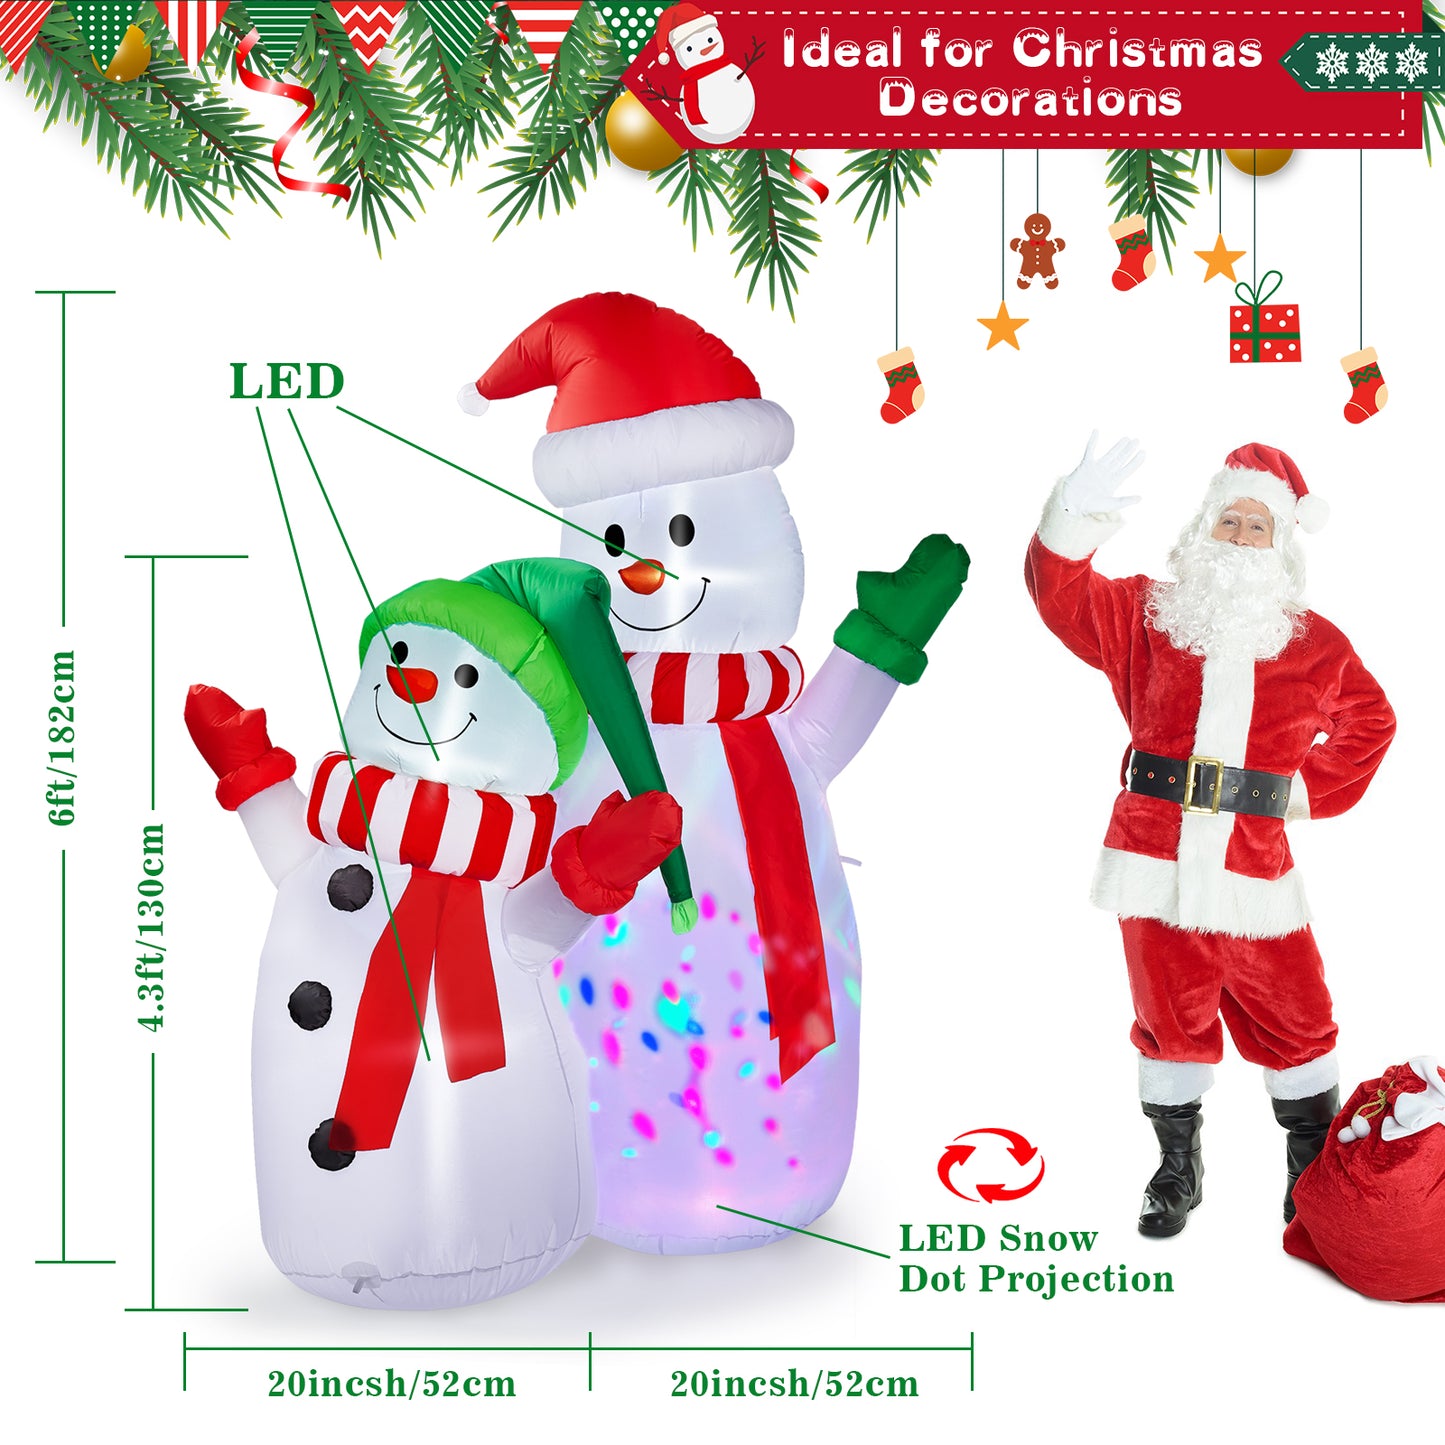 Christmas Decorations, CAMULAND 6FT Christmas Blow Up Yard Decorations Outdoor Inflatables Ornaments Snowman with Built-in LED Lights, Large Christmas Decor for Garden Party Indoor